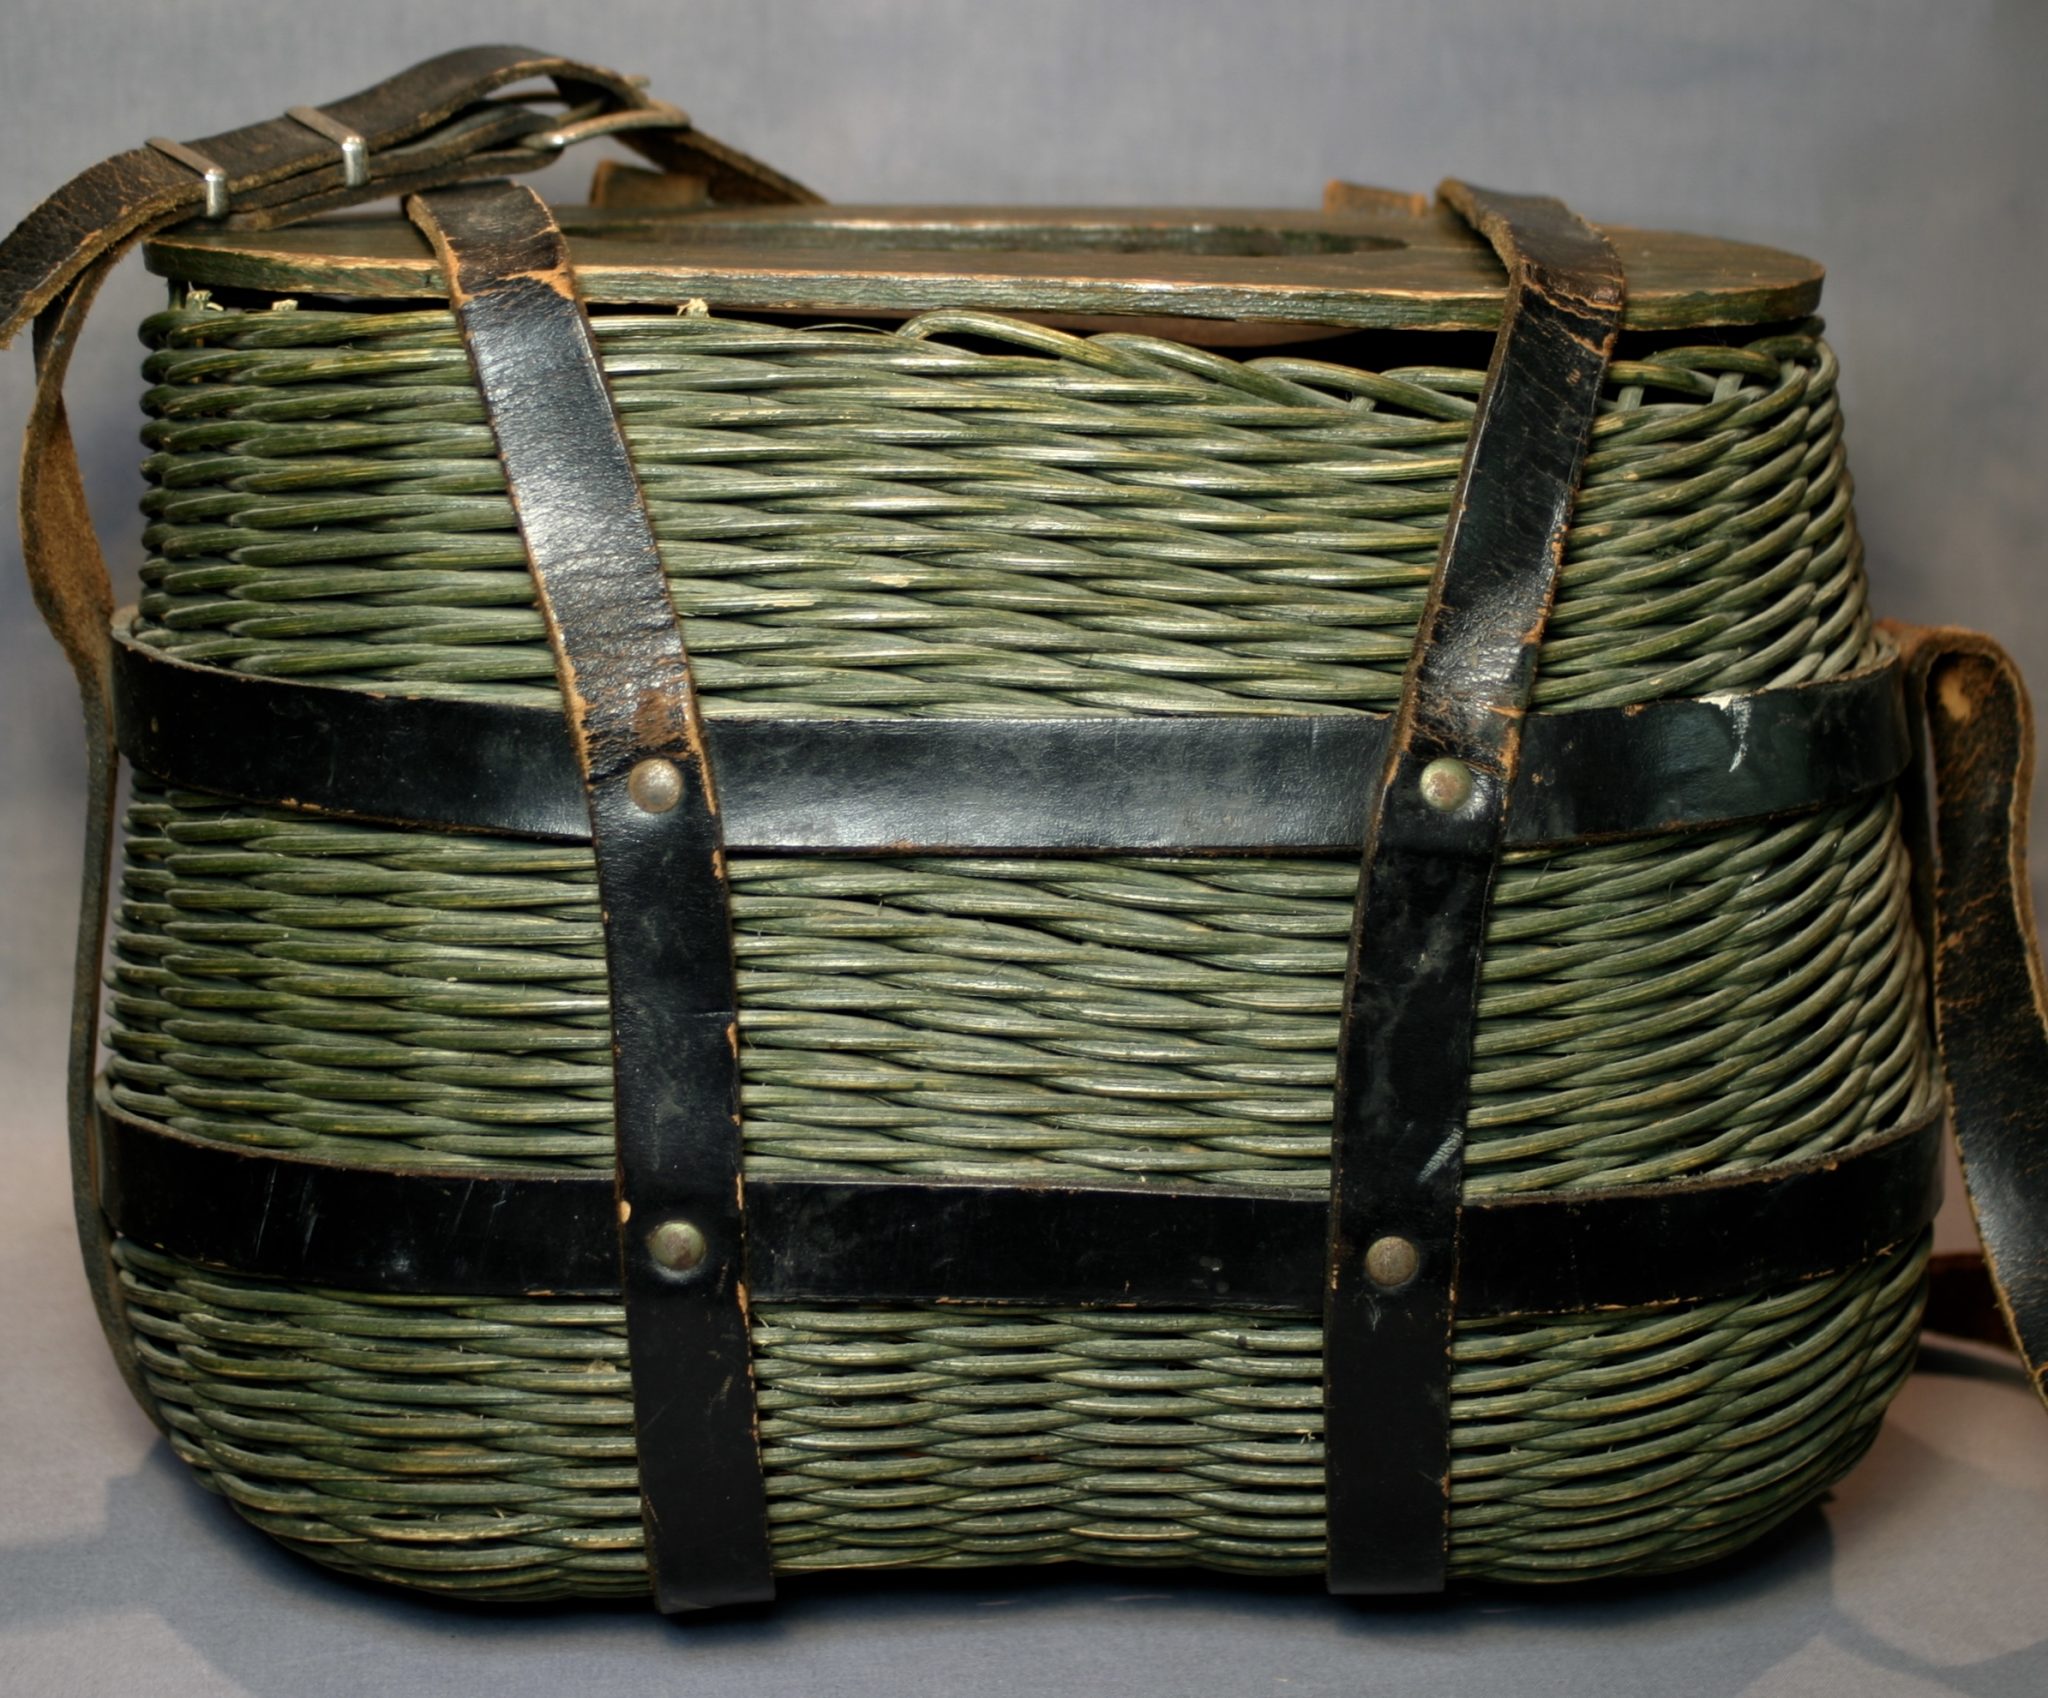 Vintage Wicker Fishing Creel With Leather Pouch